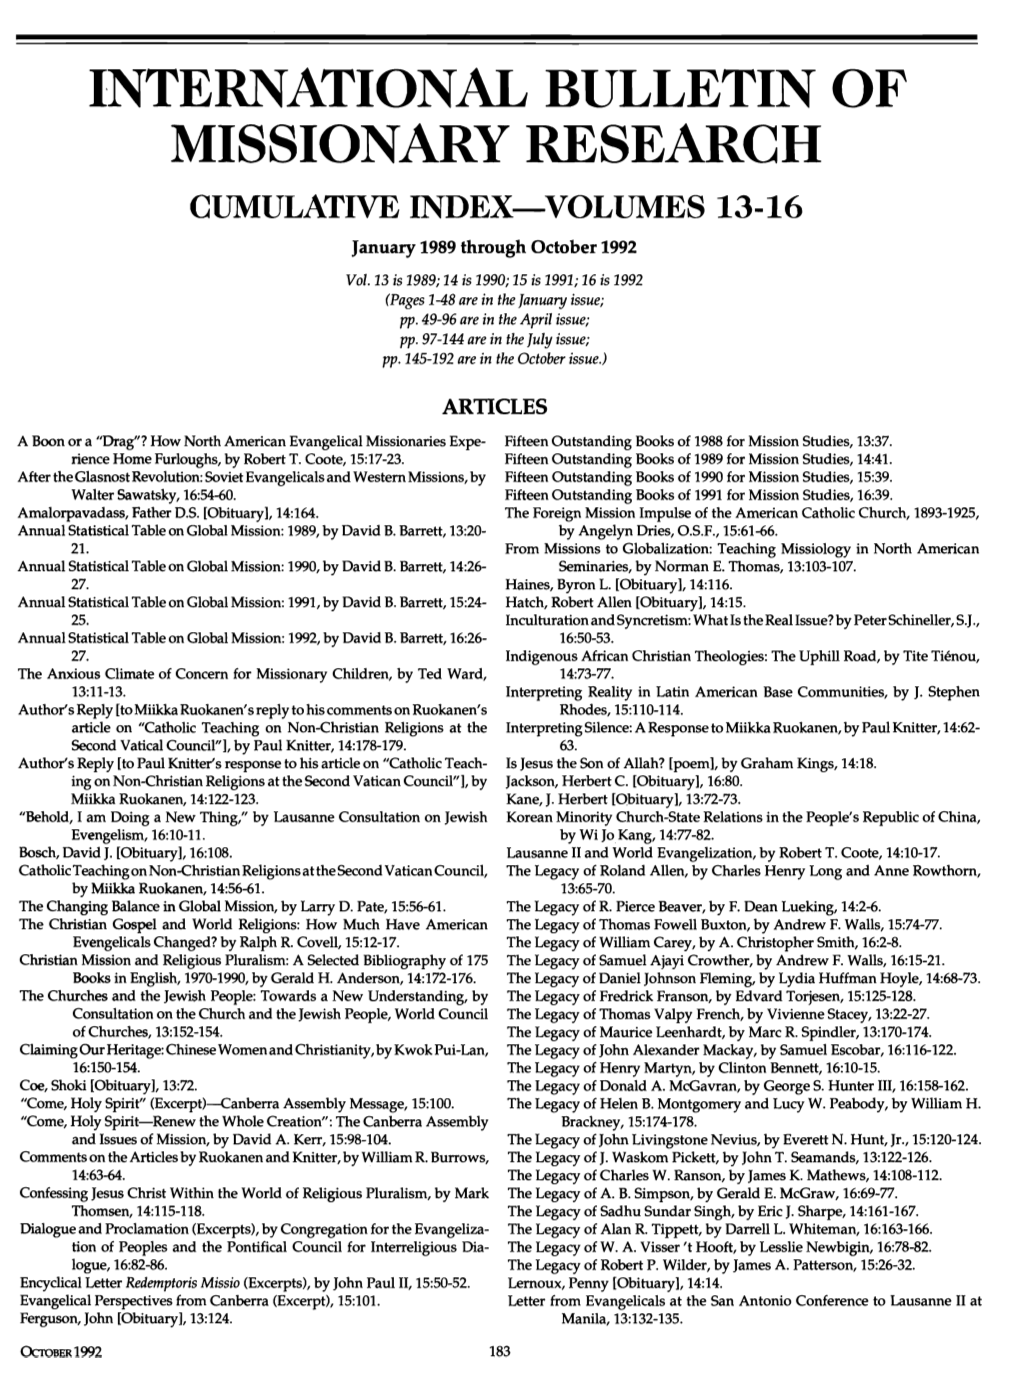 INTERNATIONAL BULLETIN of MISSIONARY RESEARCH CUMULATIVE INDEX-VOLUMES 13-16 January 1989 Through October 1992